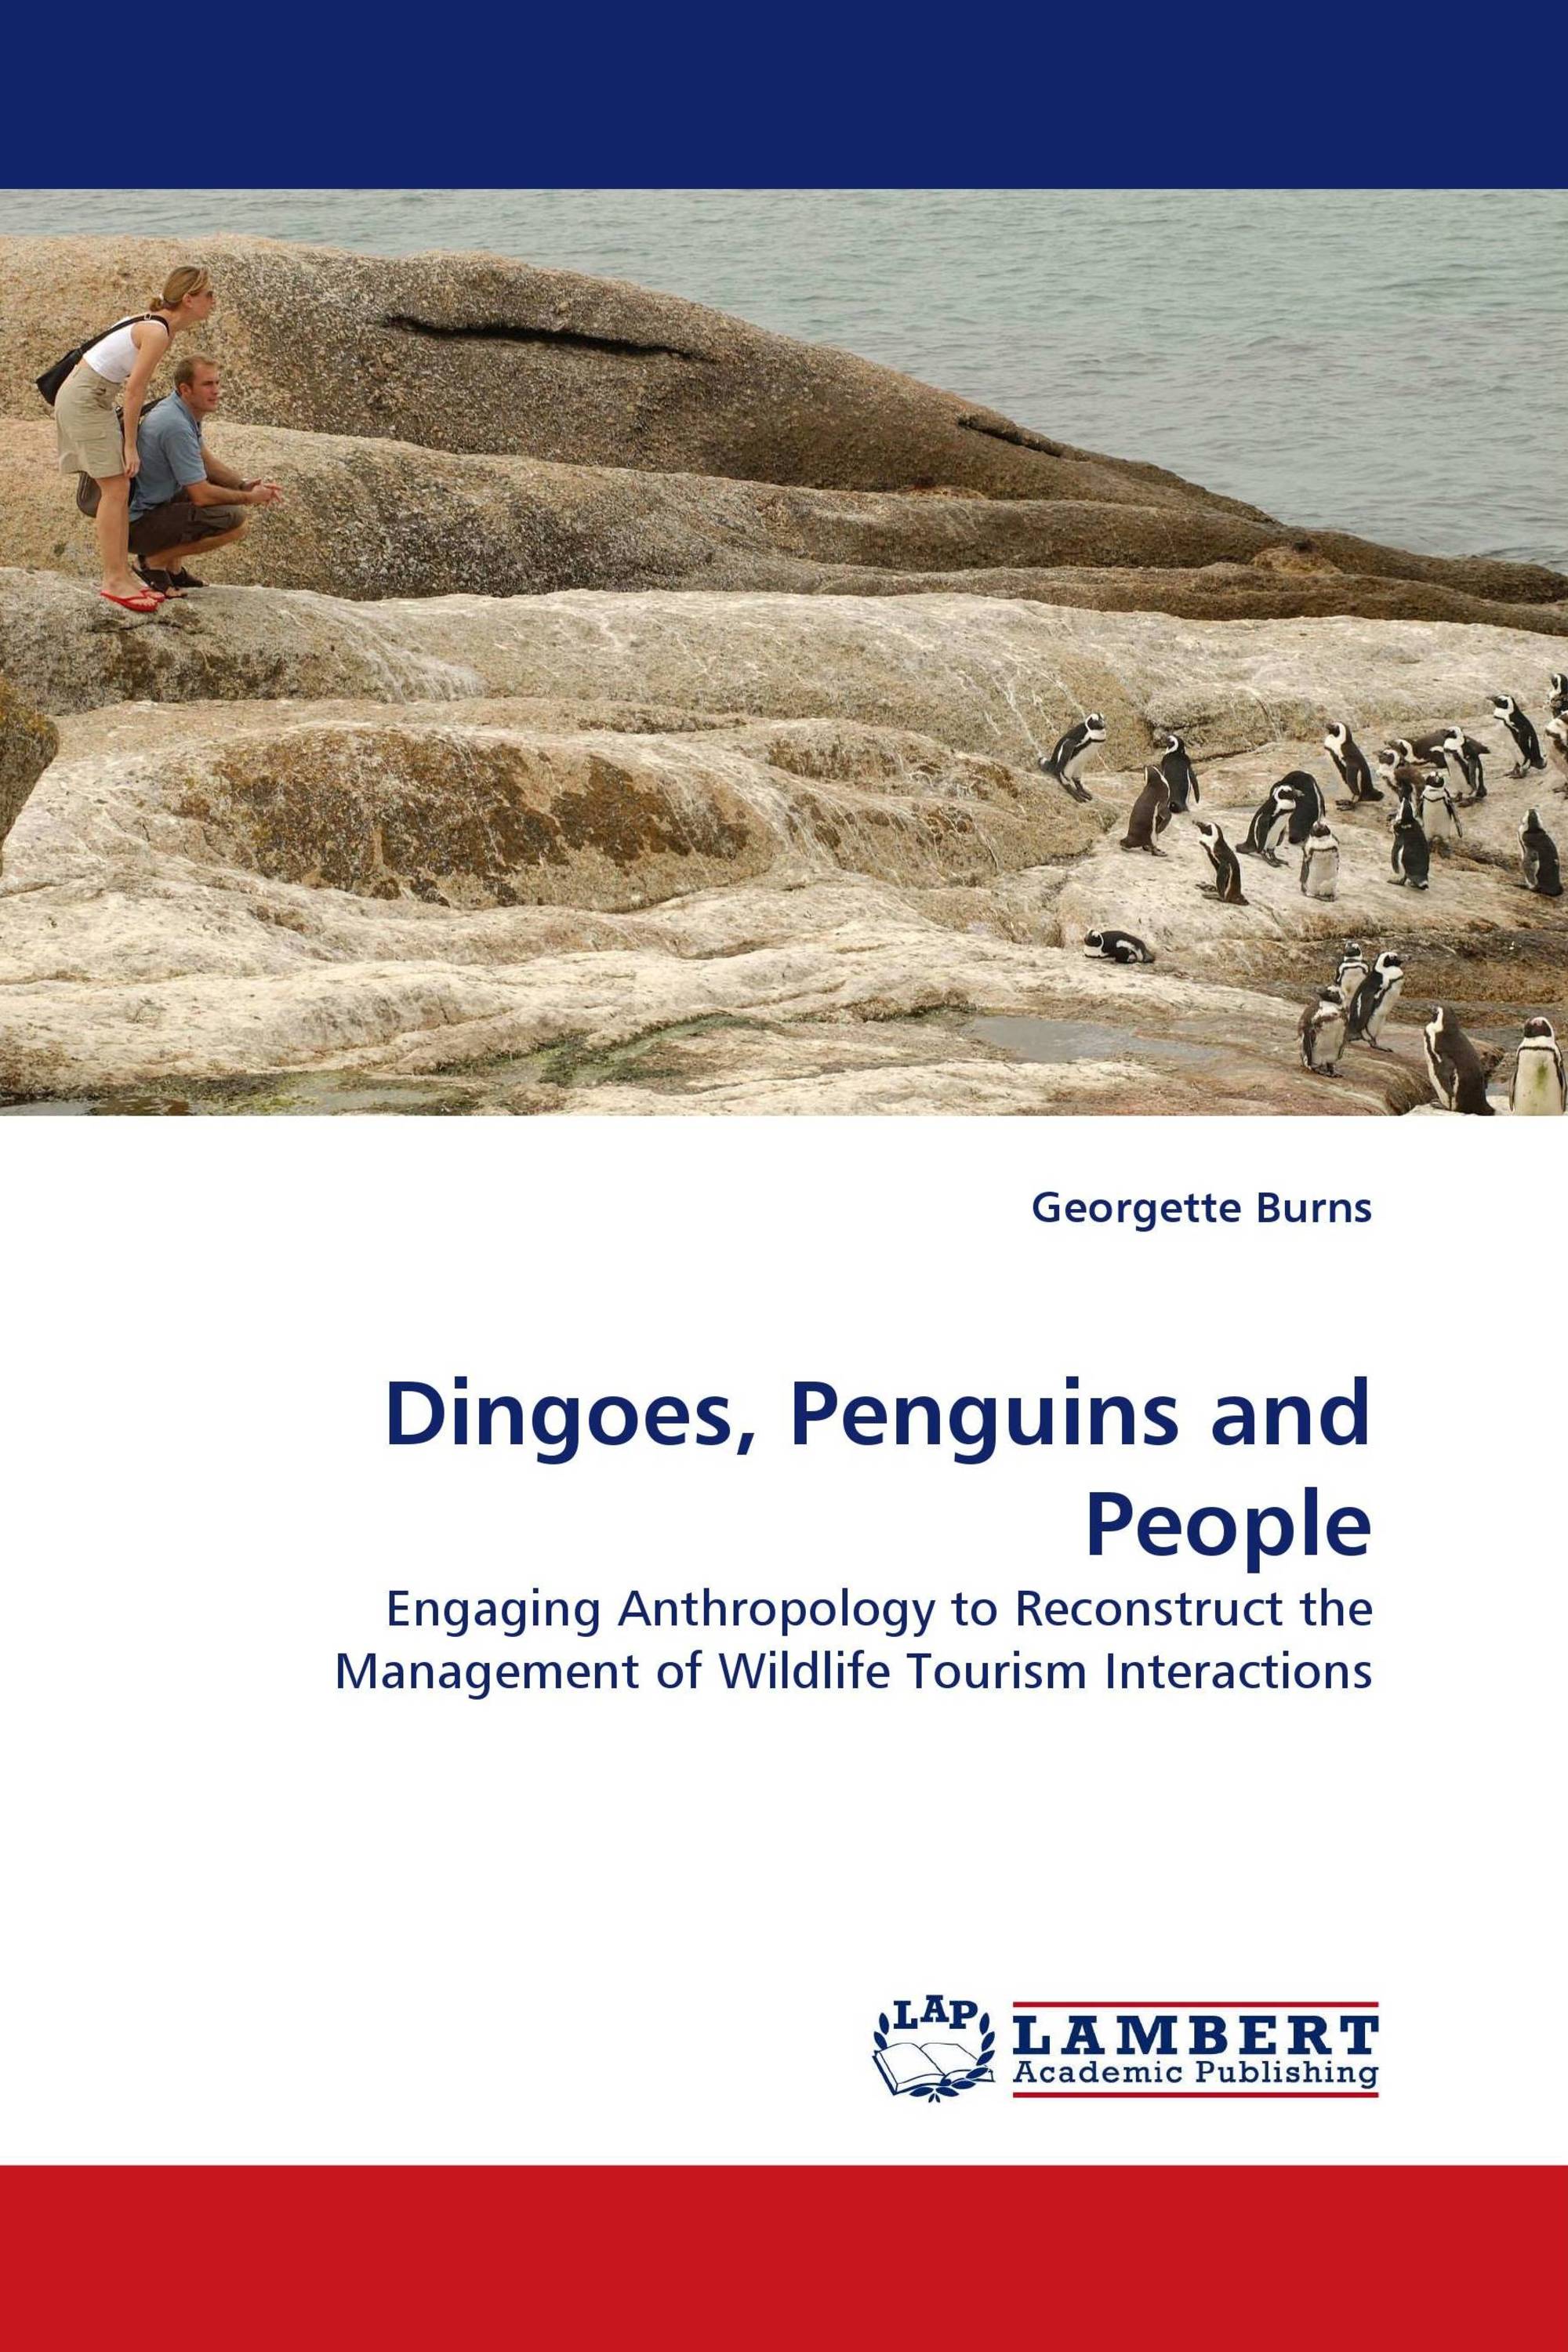 Dingoes, Penguins and People